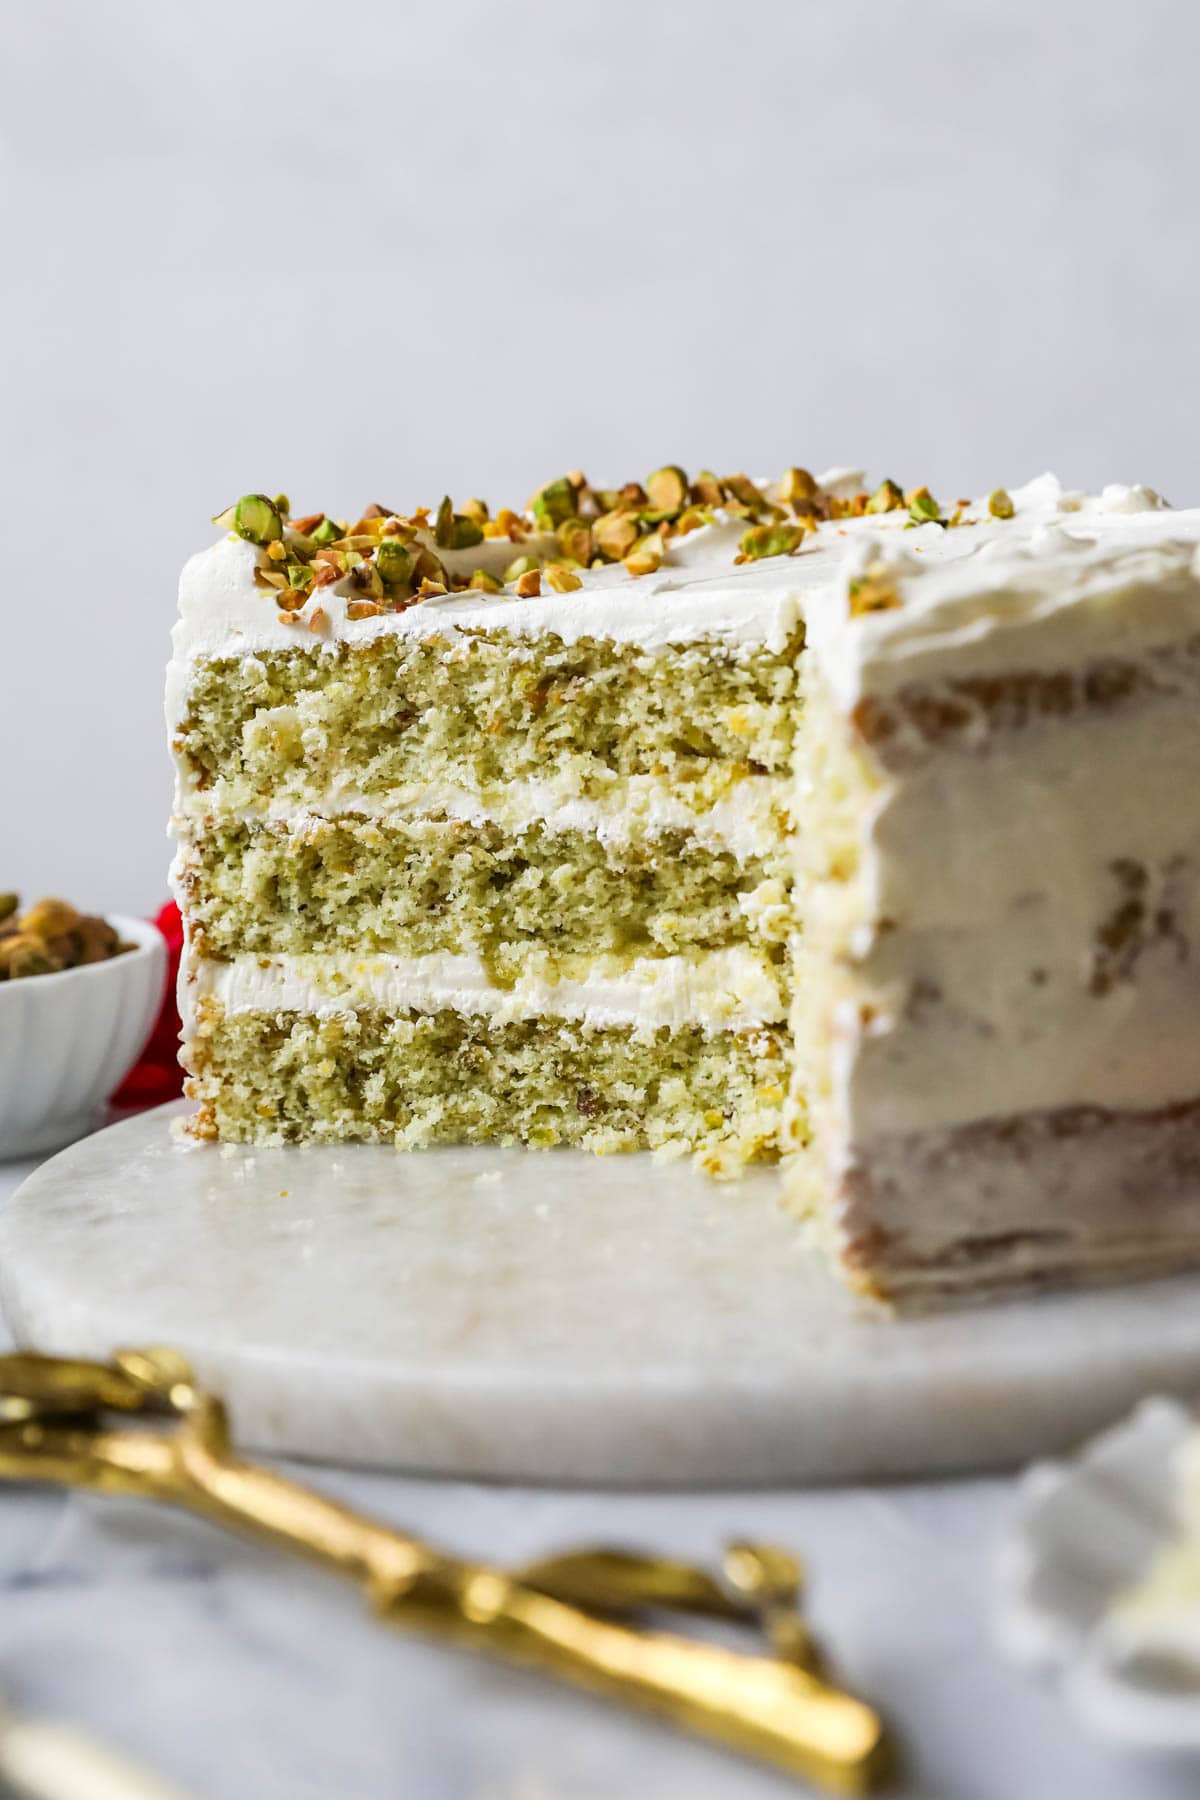 Cross section of a pistachio cake made with three layers of green cake and a swiss meringue buttercream frosting.